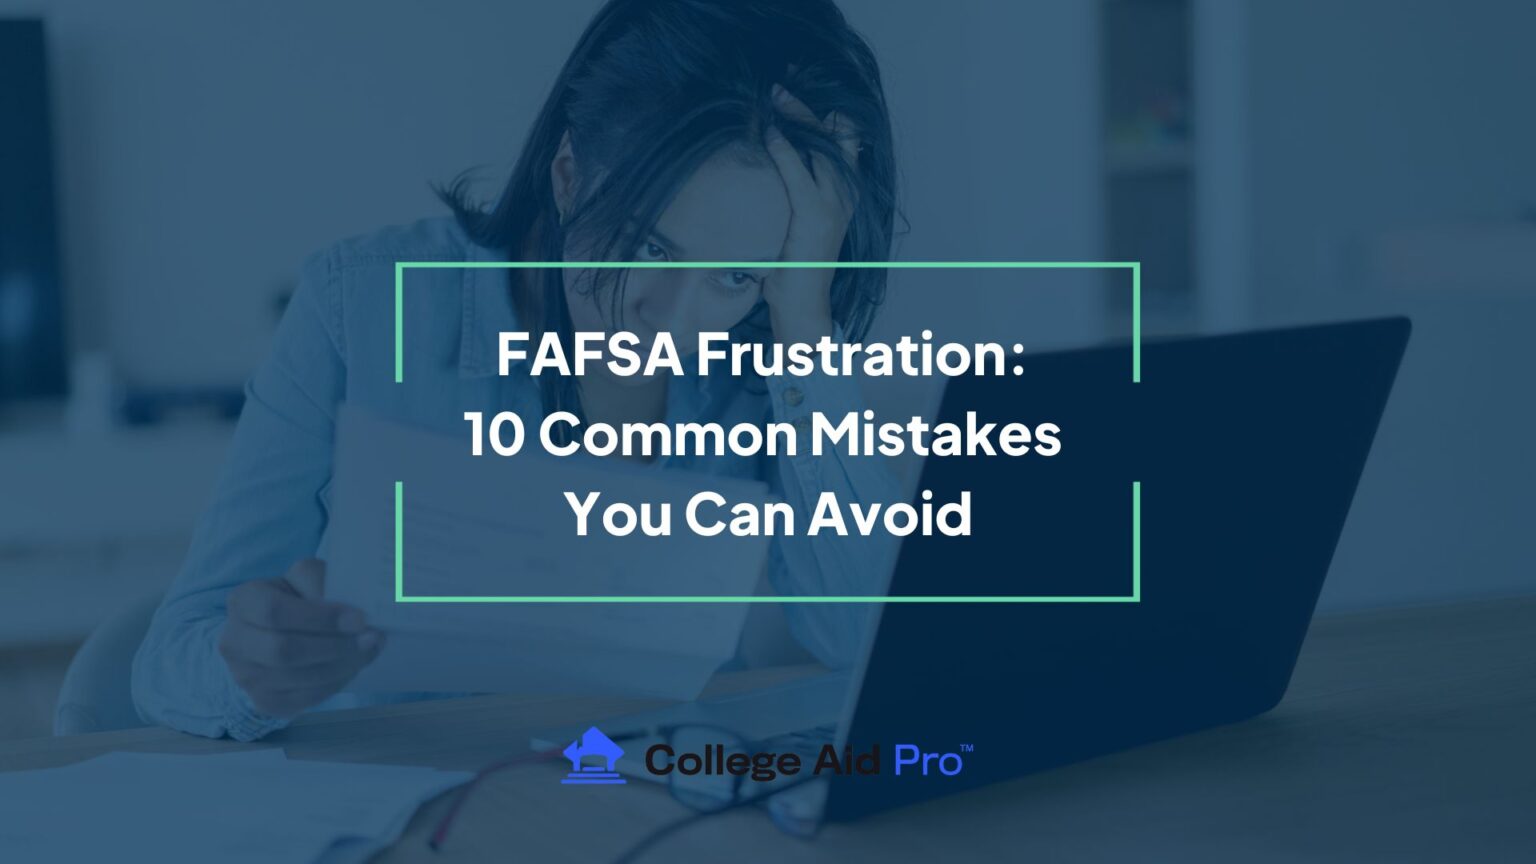 FAFSA Frustration 10 Common Mistakes You Can Avoid College Aid Pro